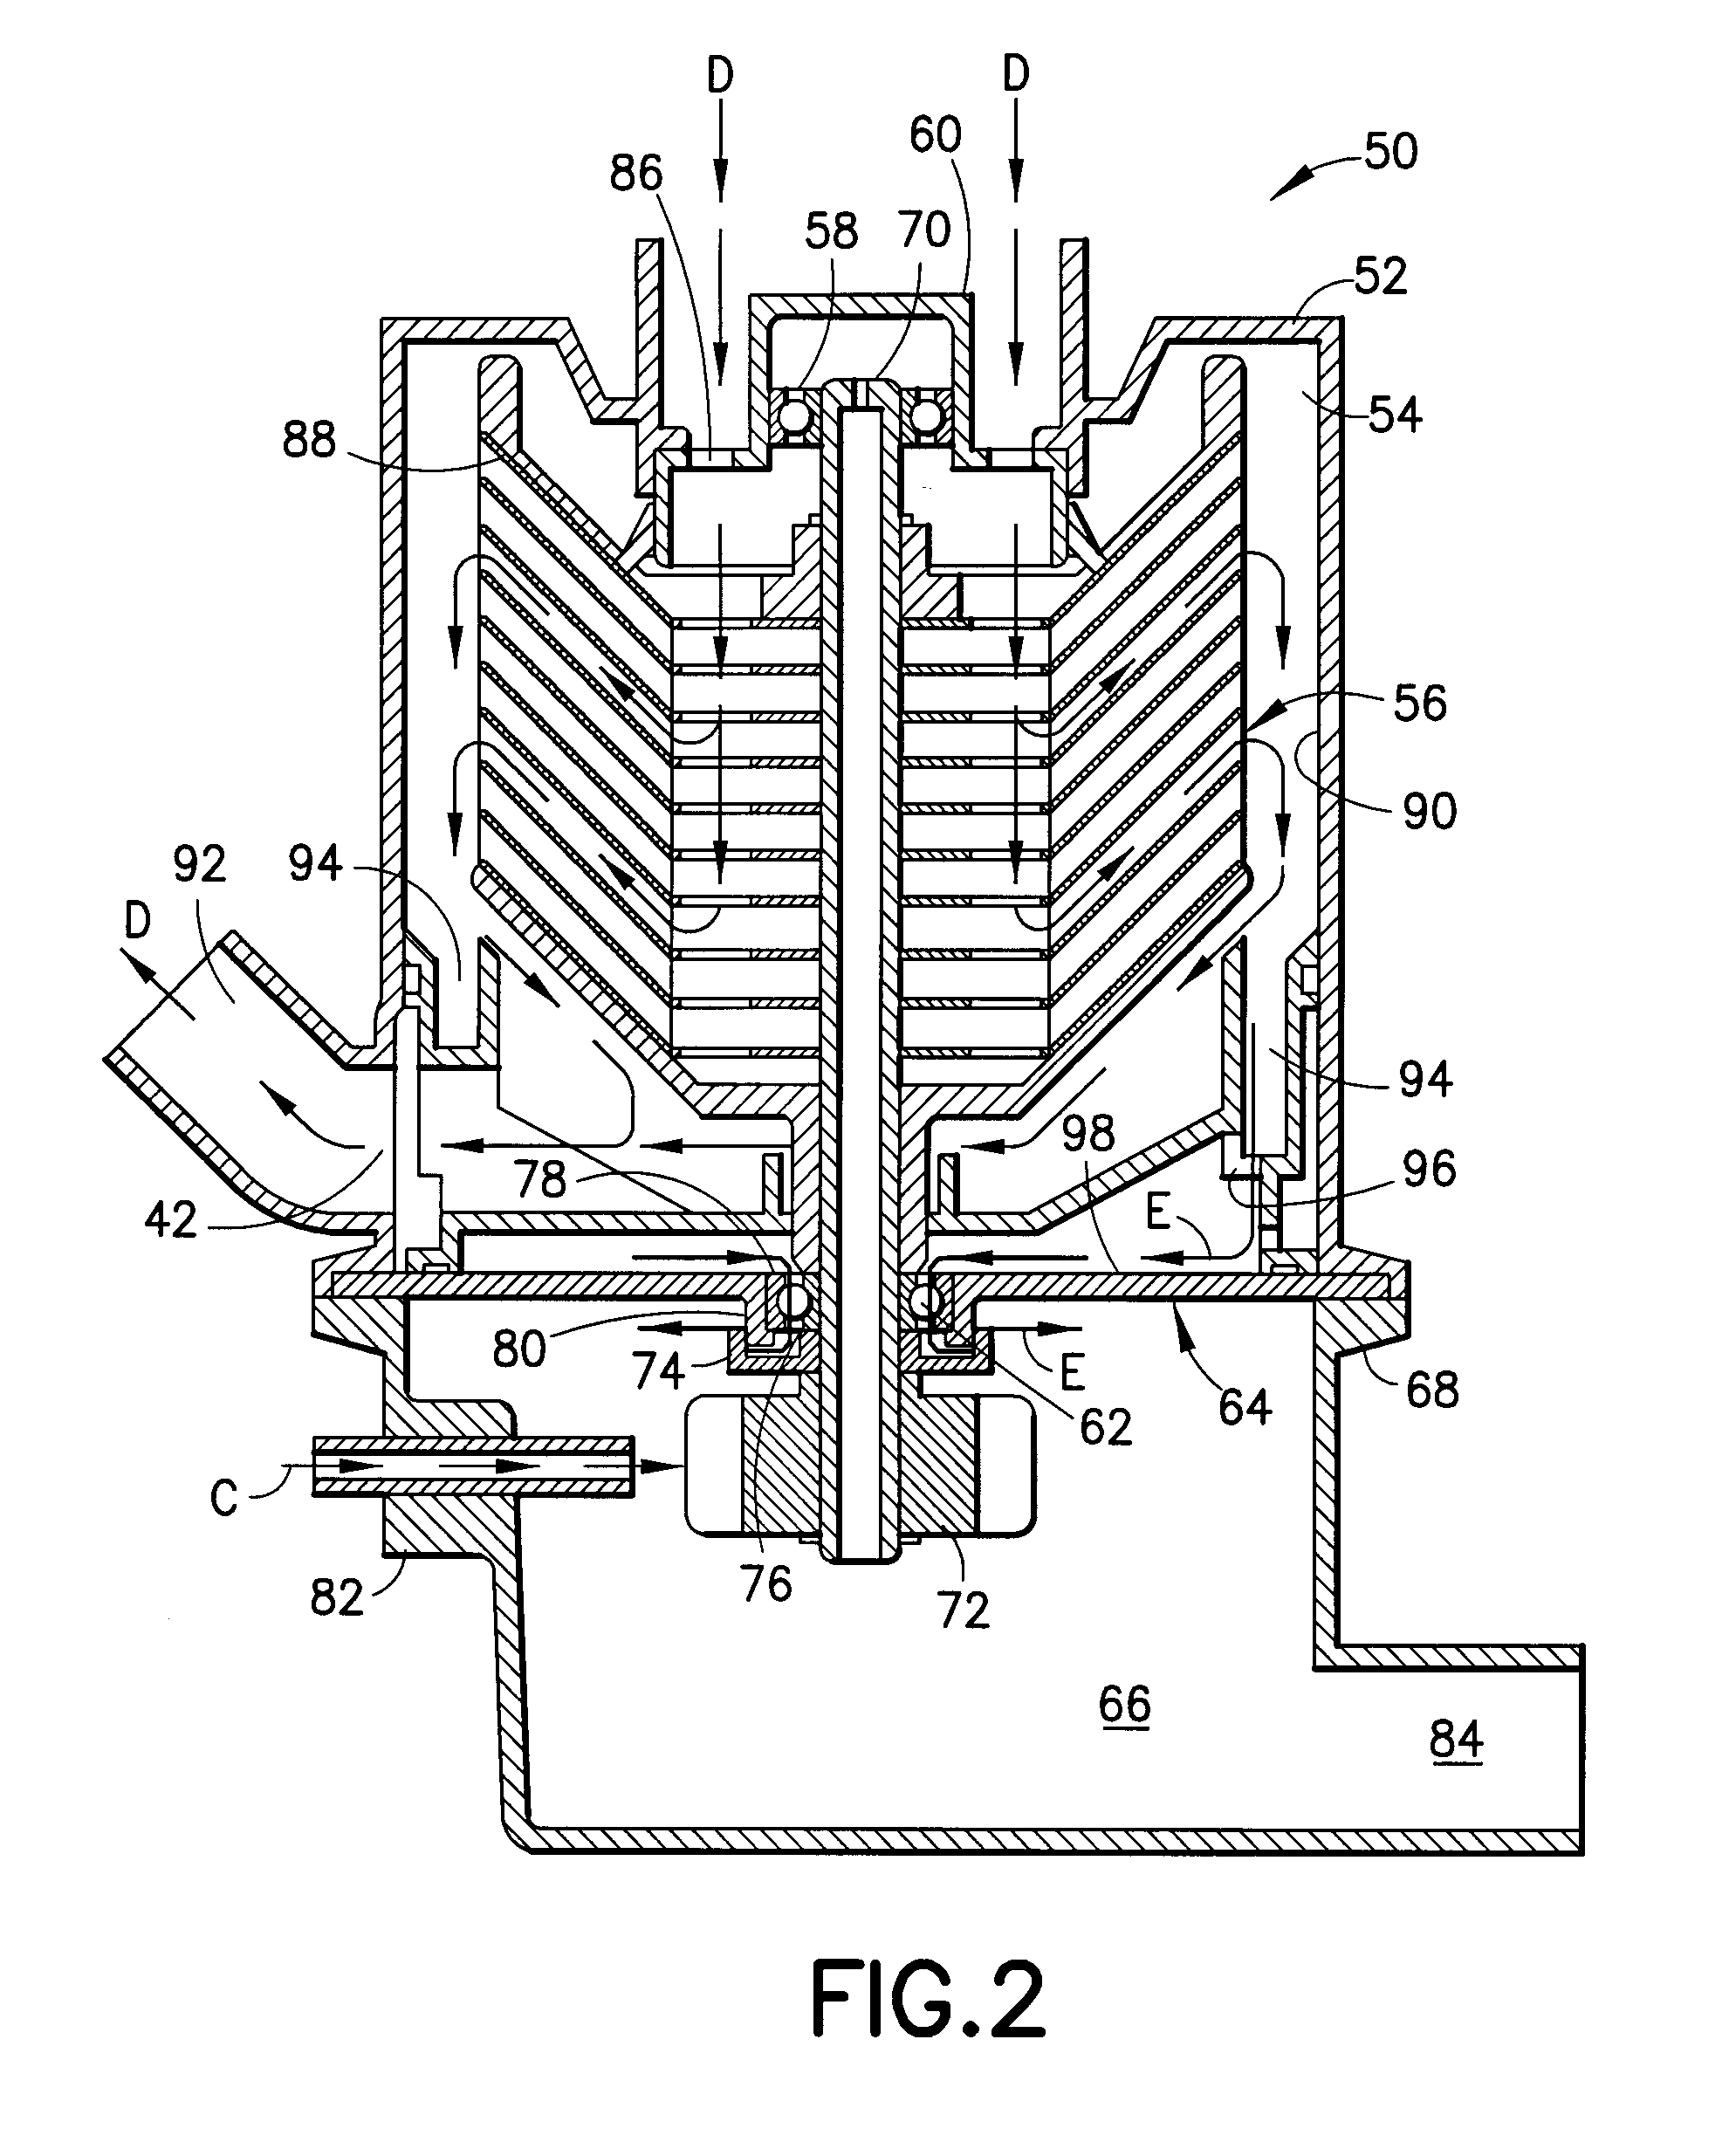 Centrifugal separator for cleaning gas generated by an internal combustion engine and a method for operating the same